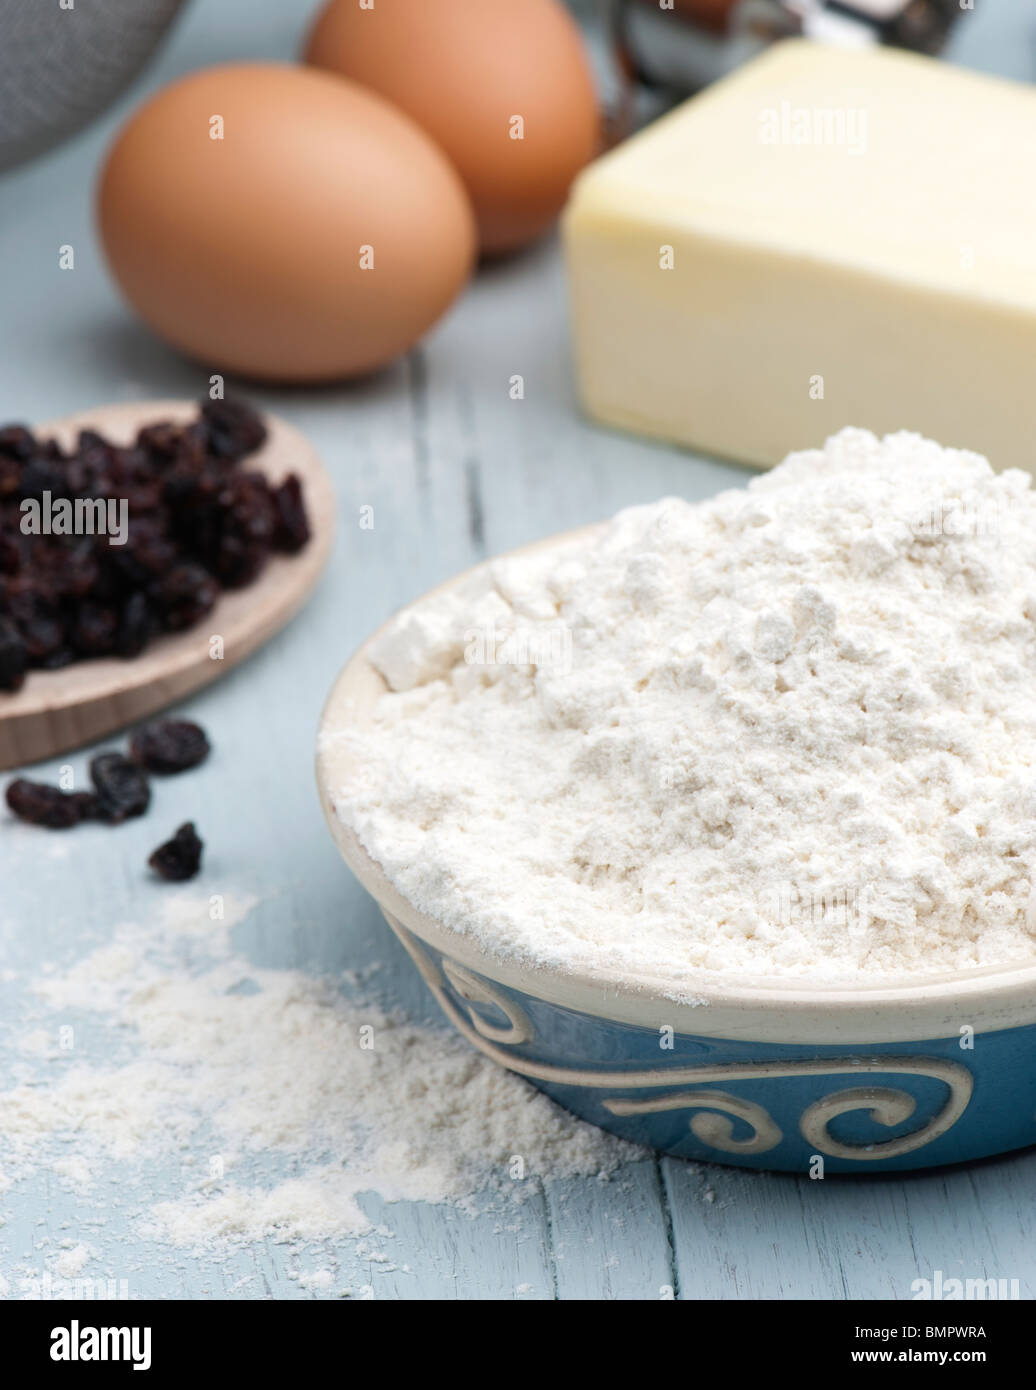 Baking Ingredients On A Wooden Kitchen Table Stock Photo